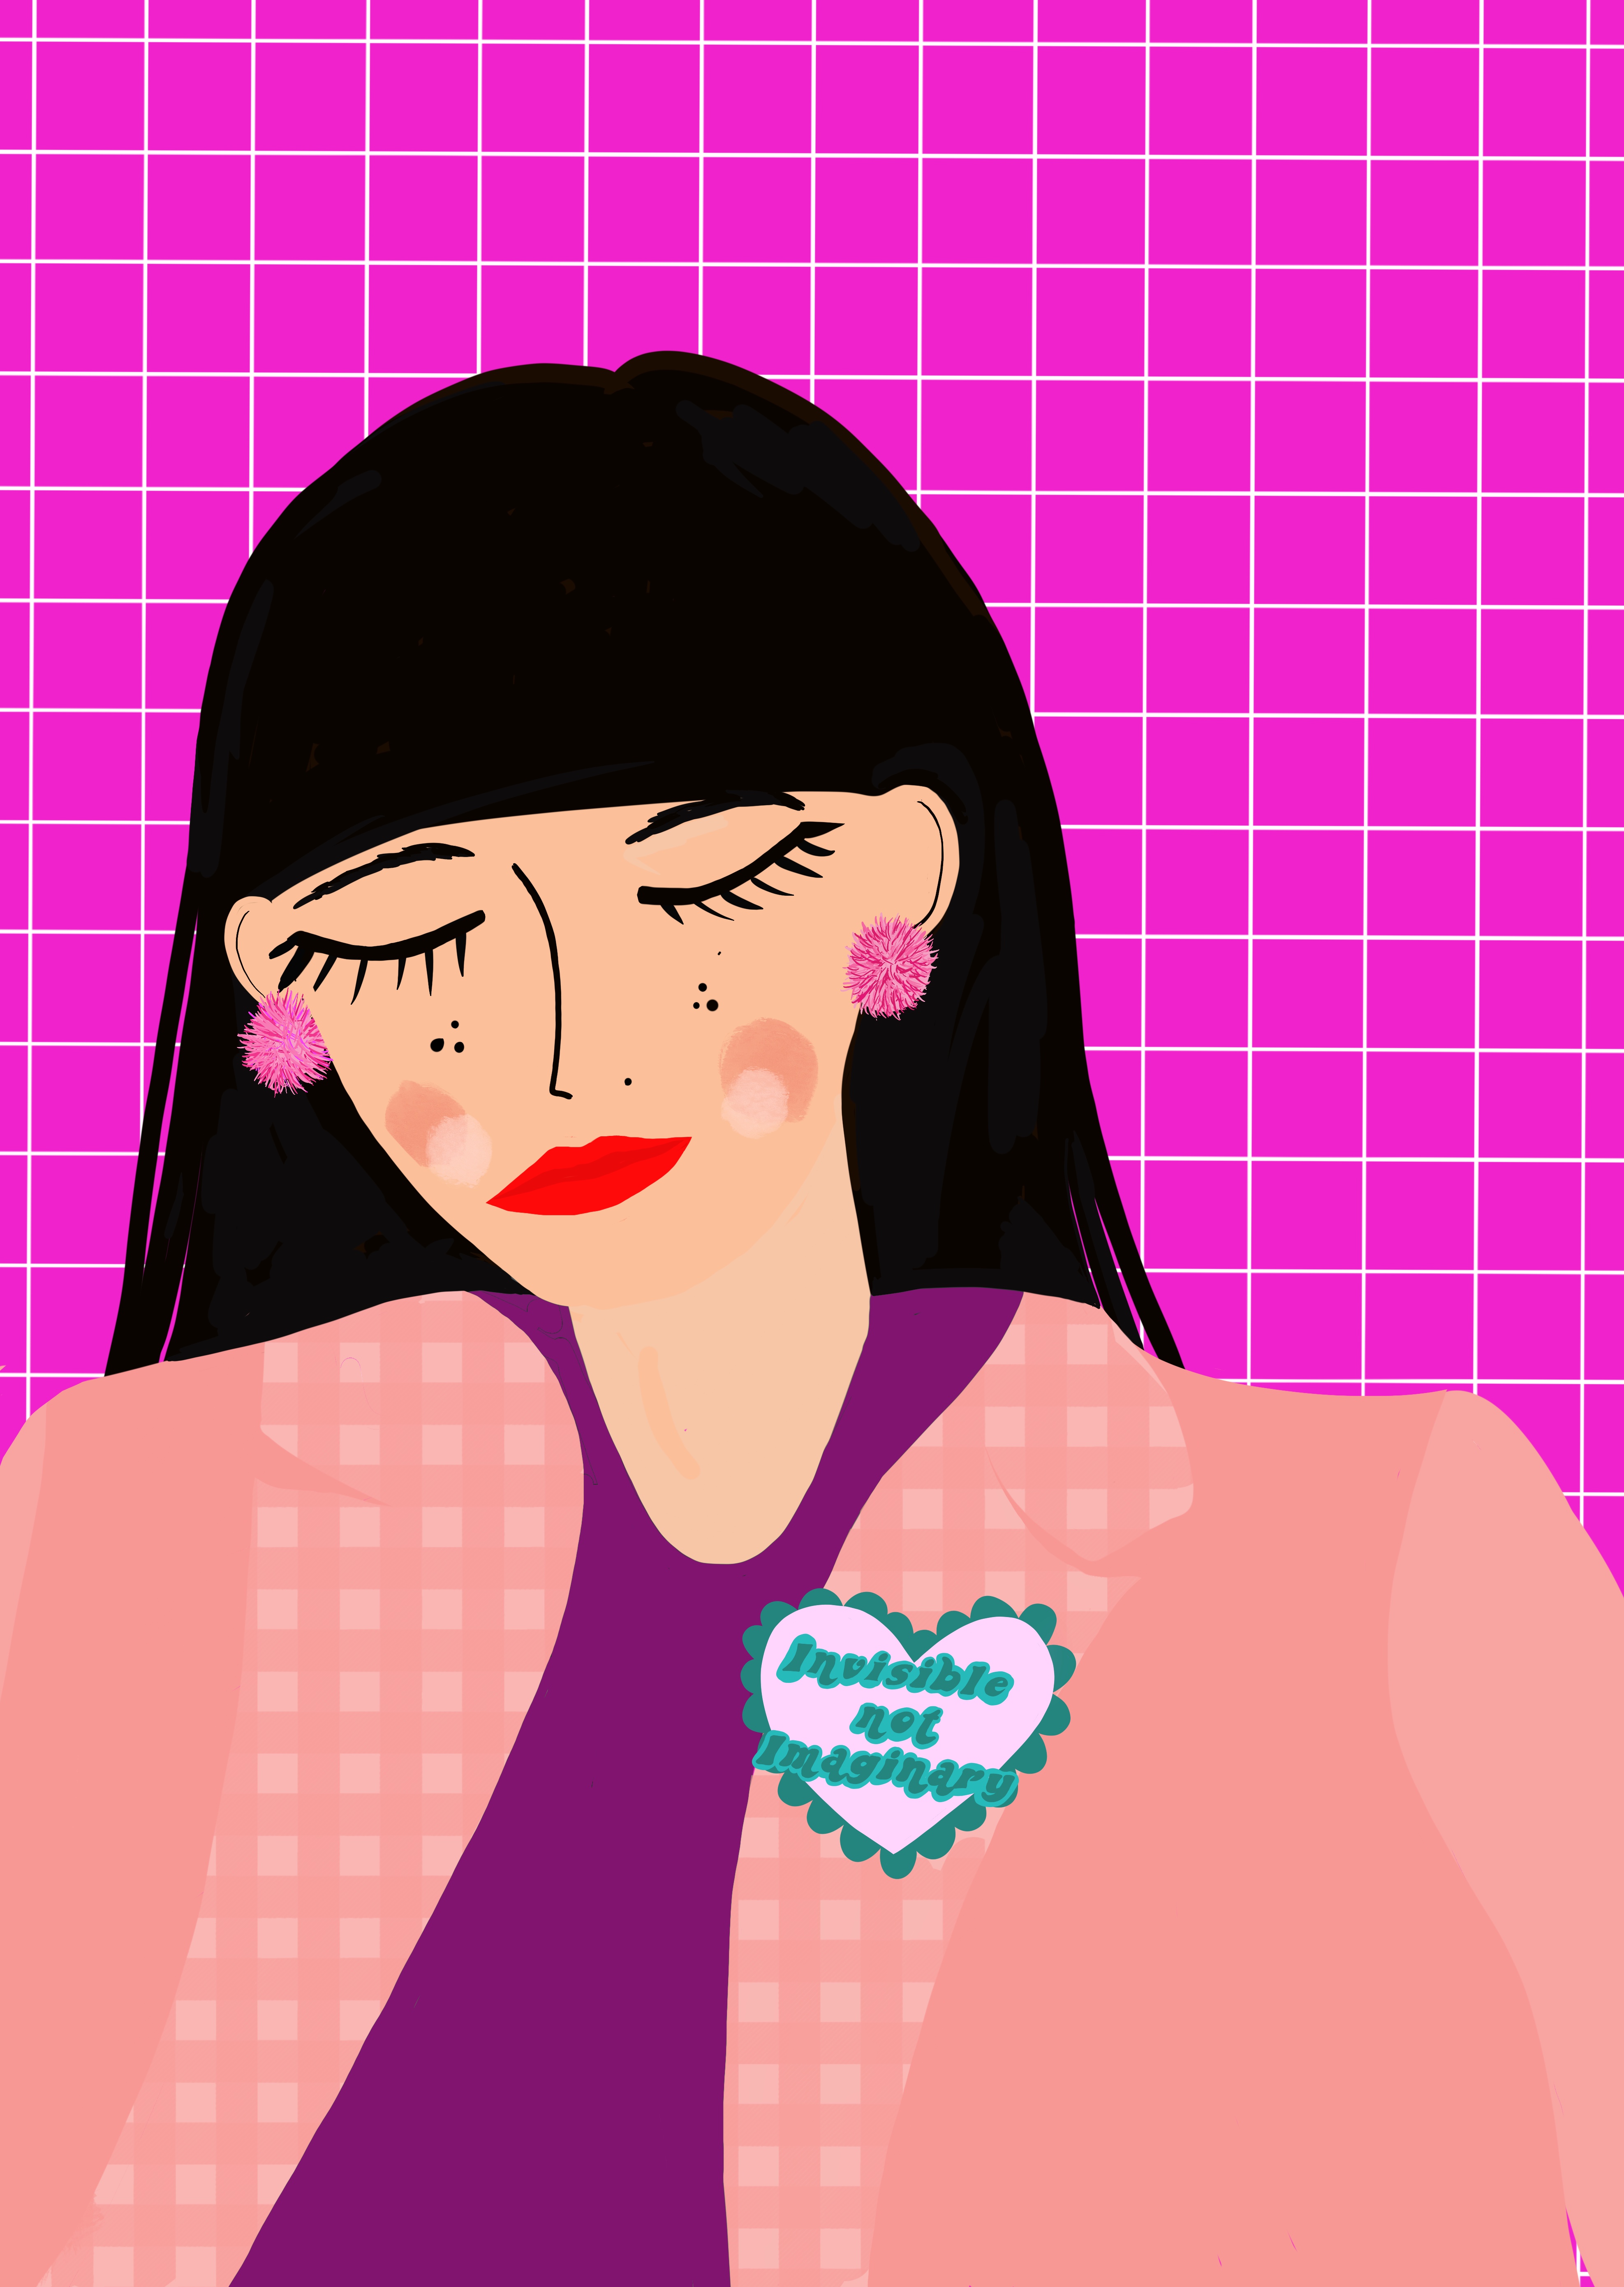 illustration of woman wearing a pink jacket and a badge saying invisible not imaginary, there is a fluorescent background